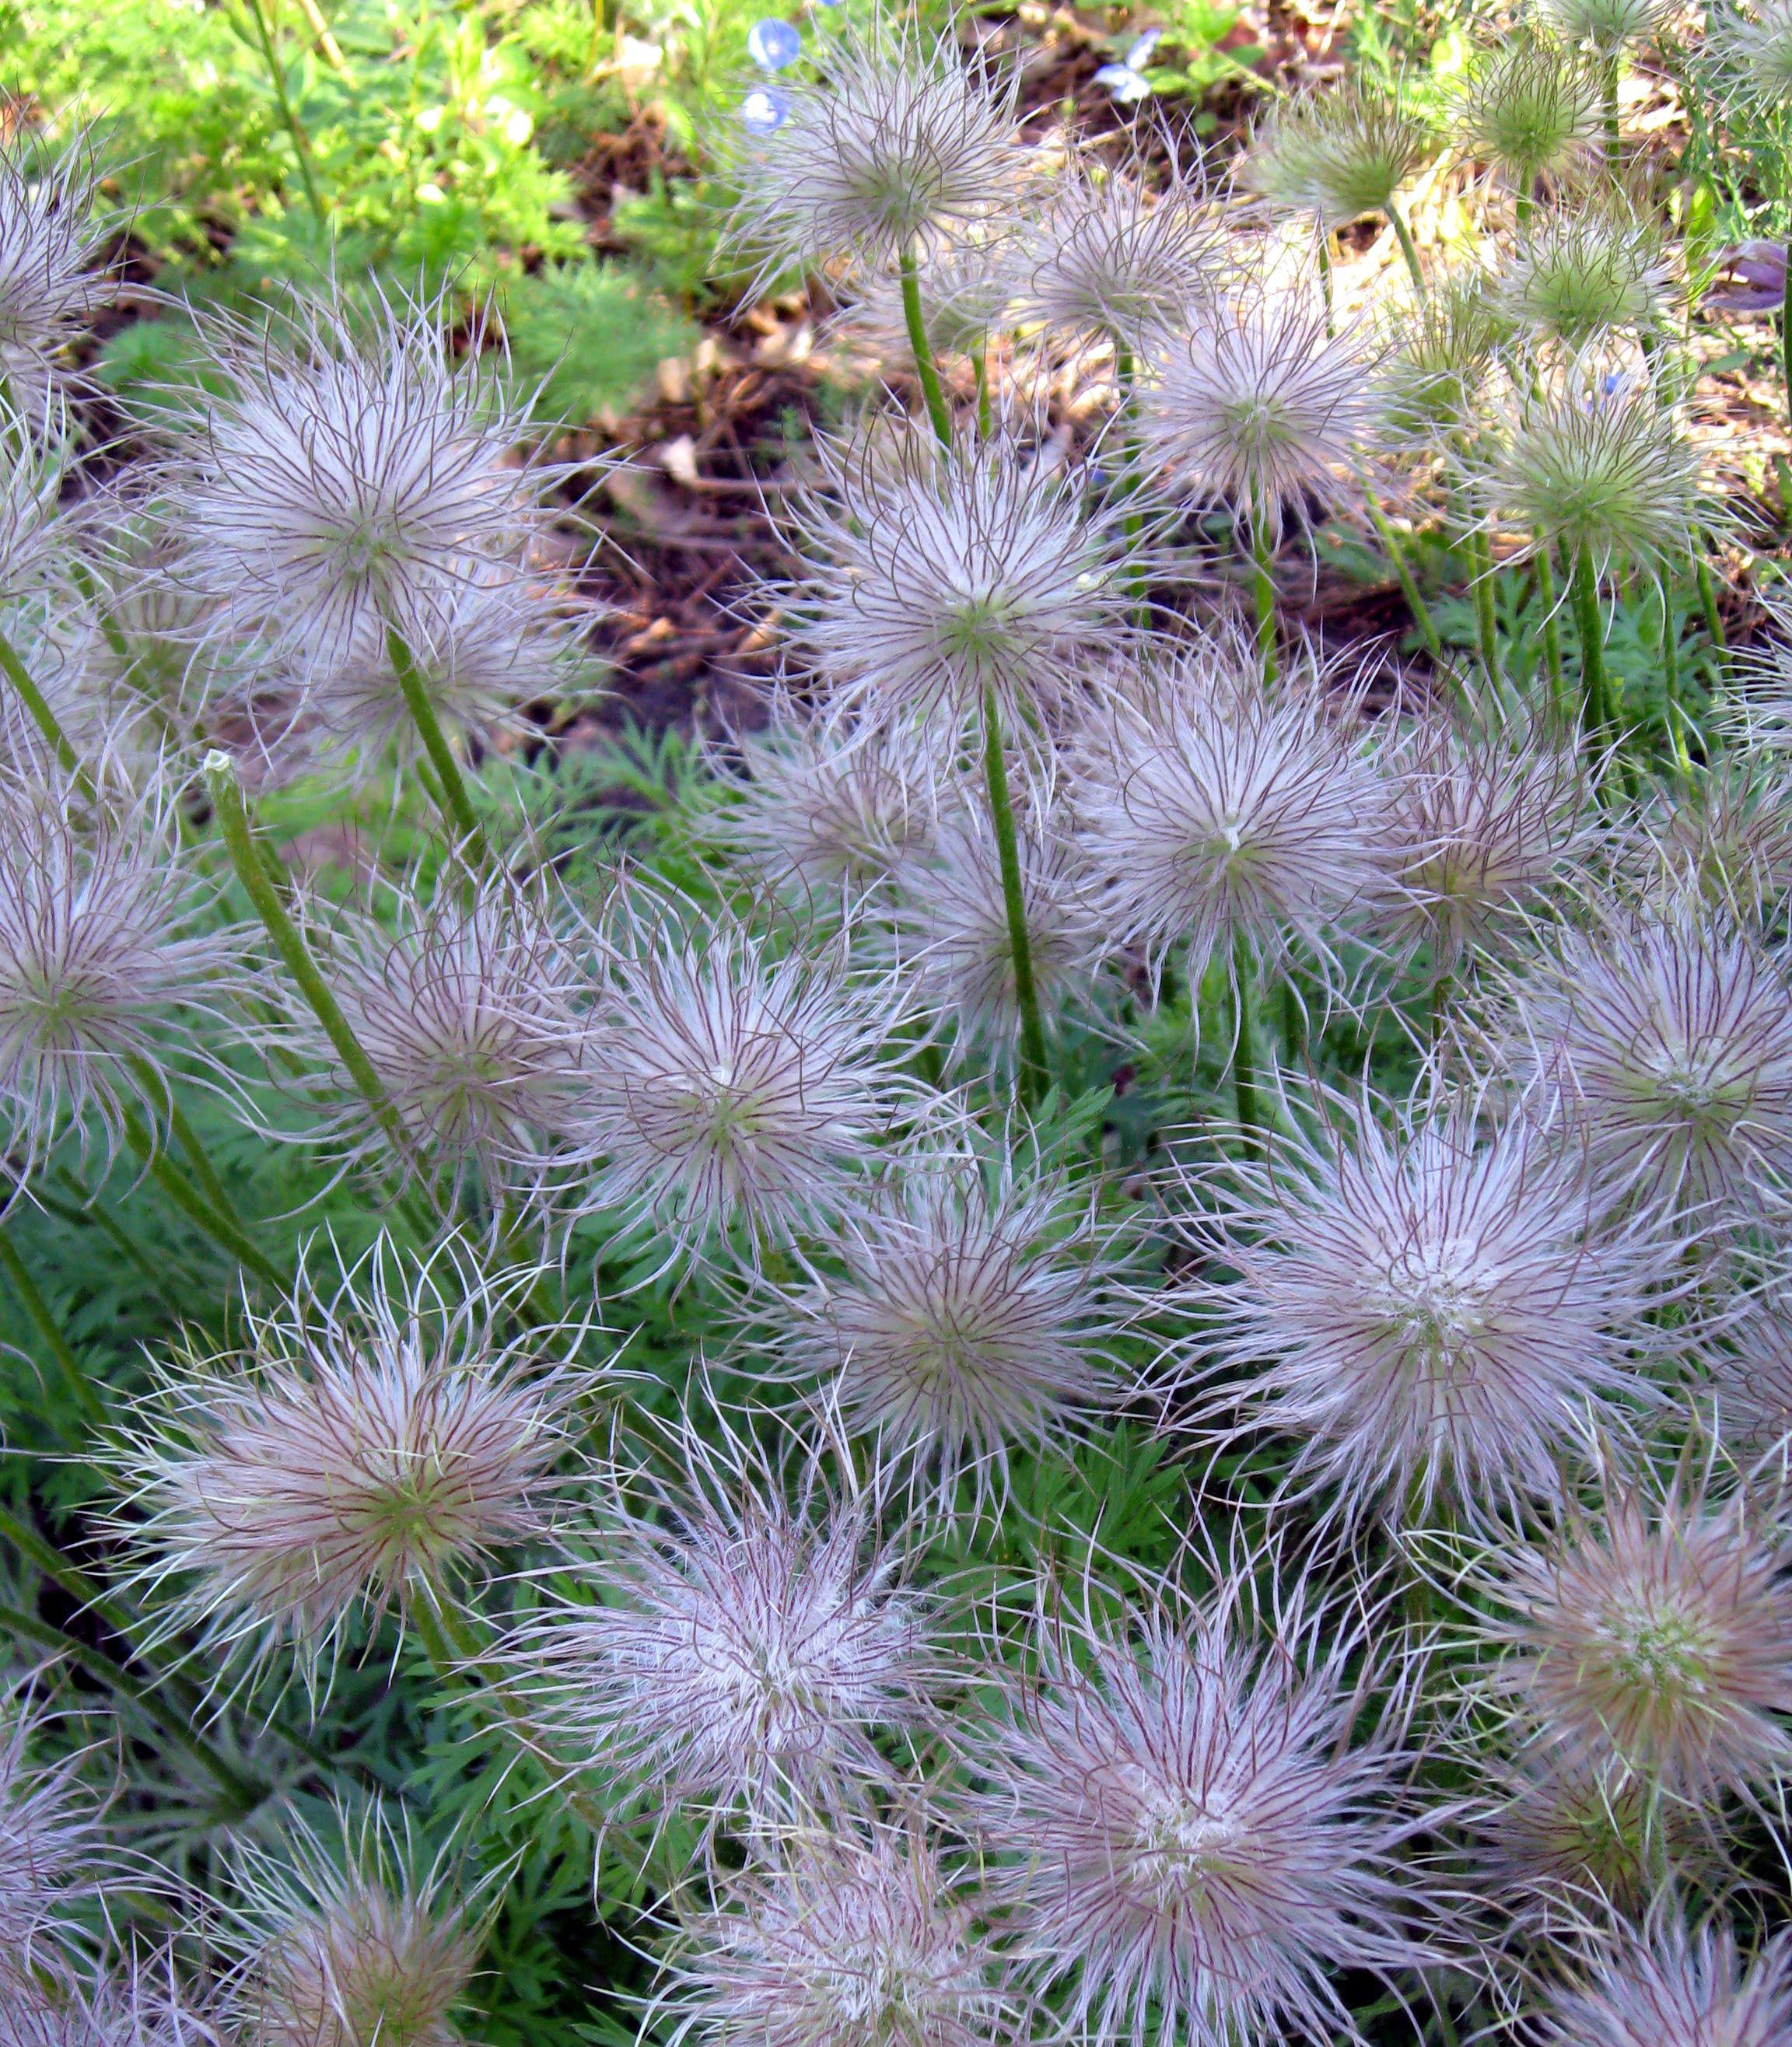 flowers with fluffy, white to pink seed heads